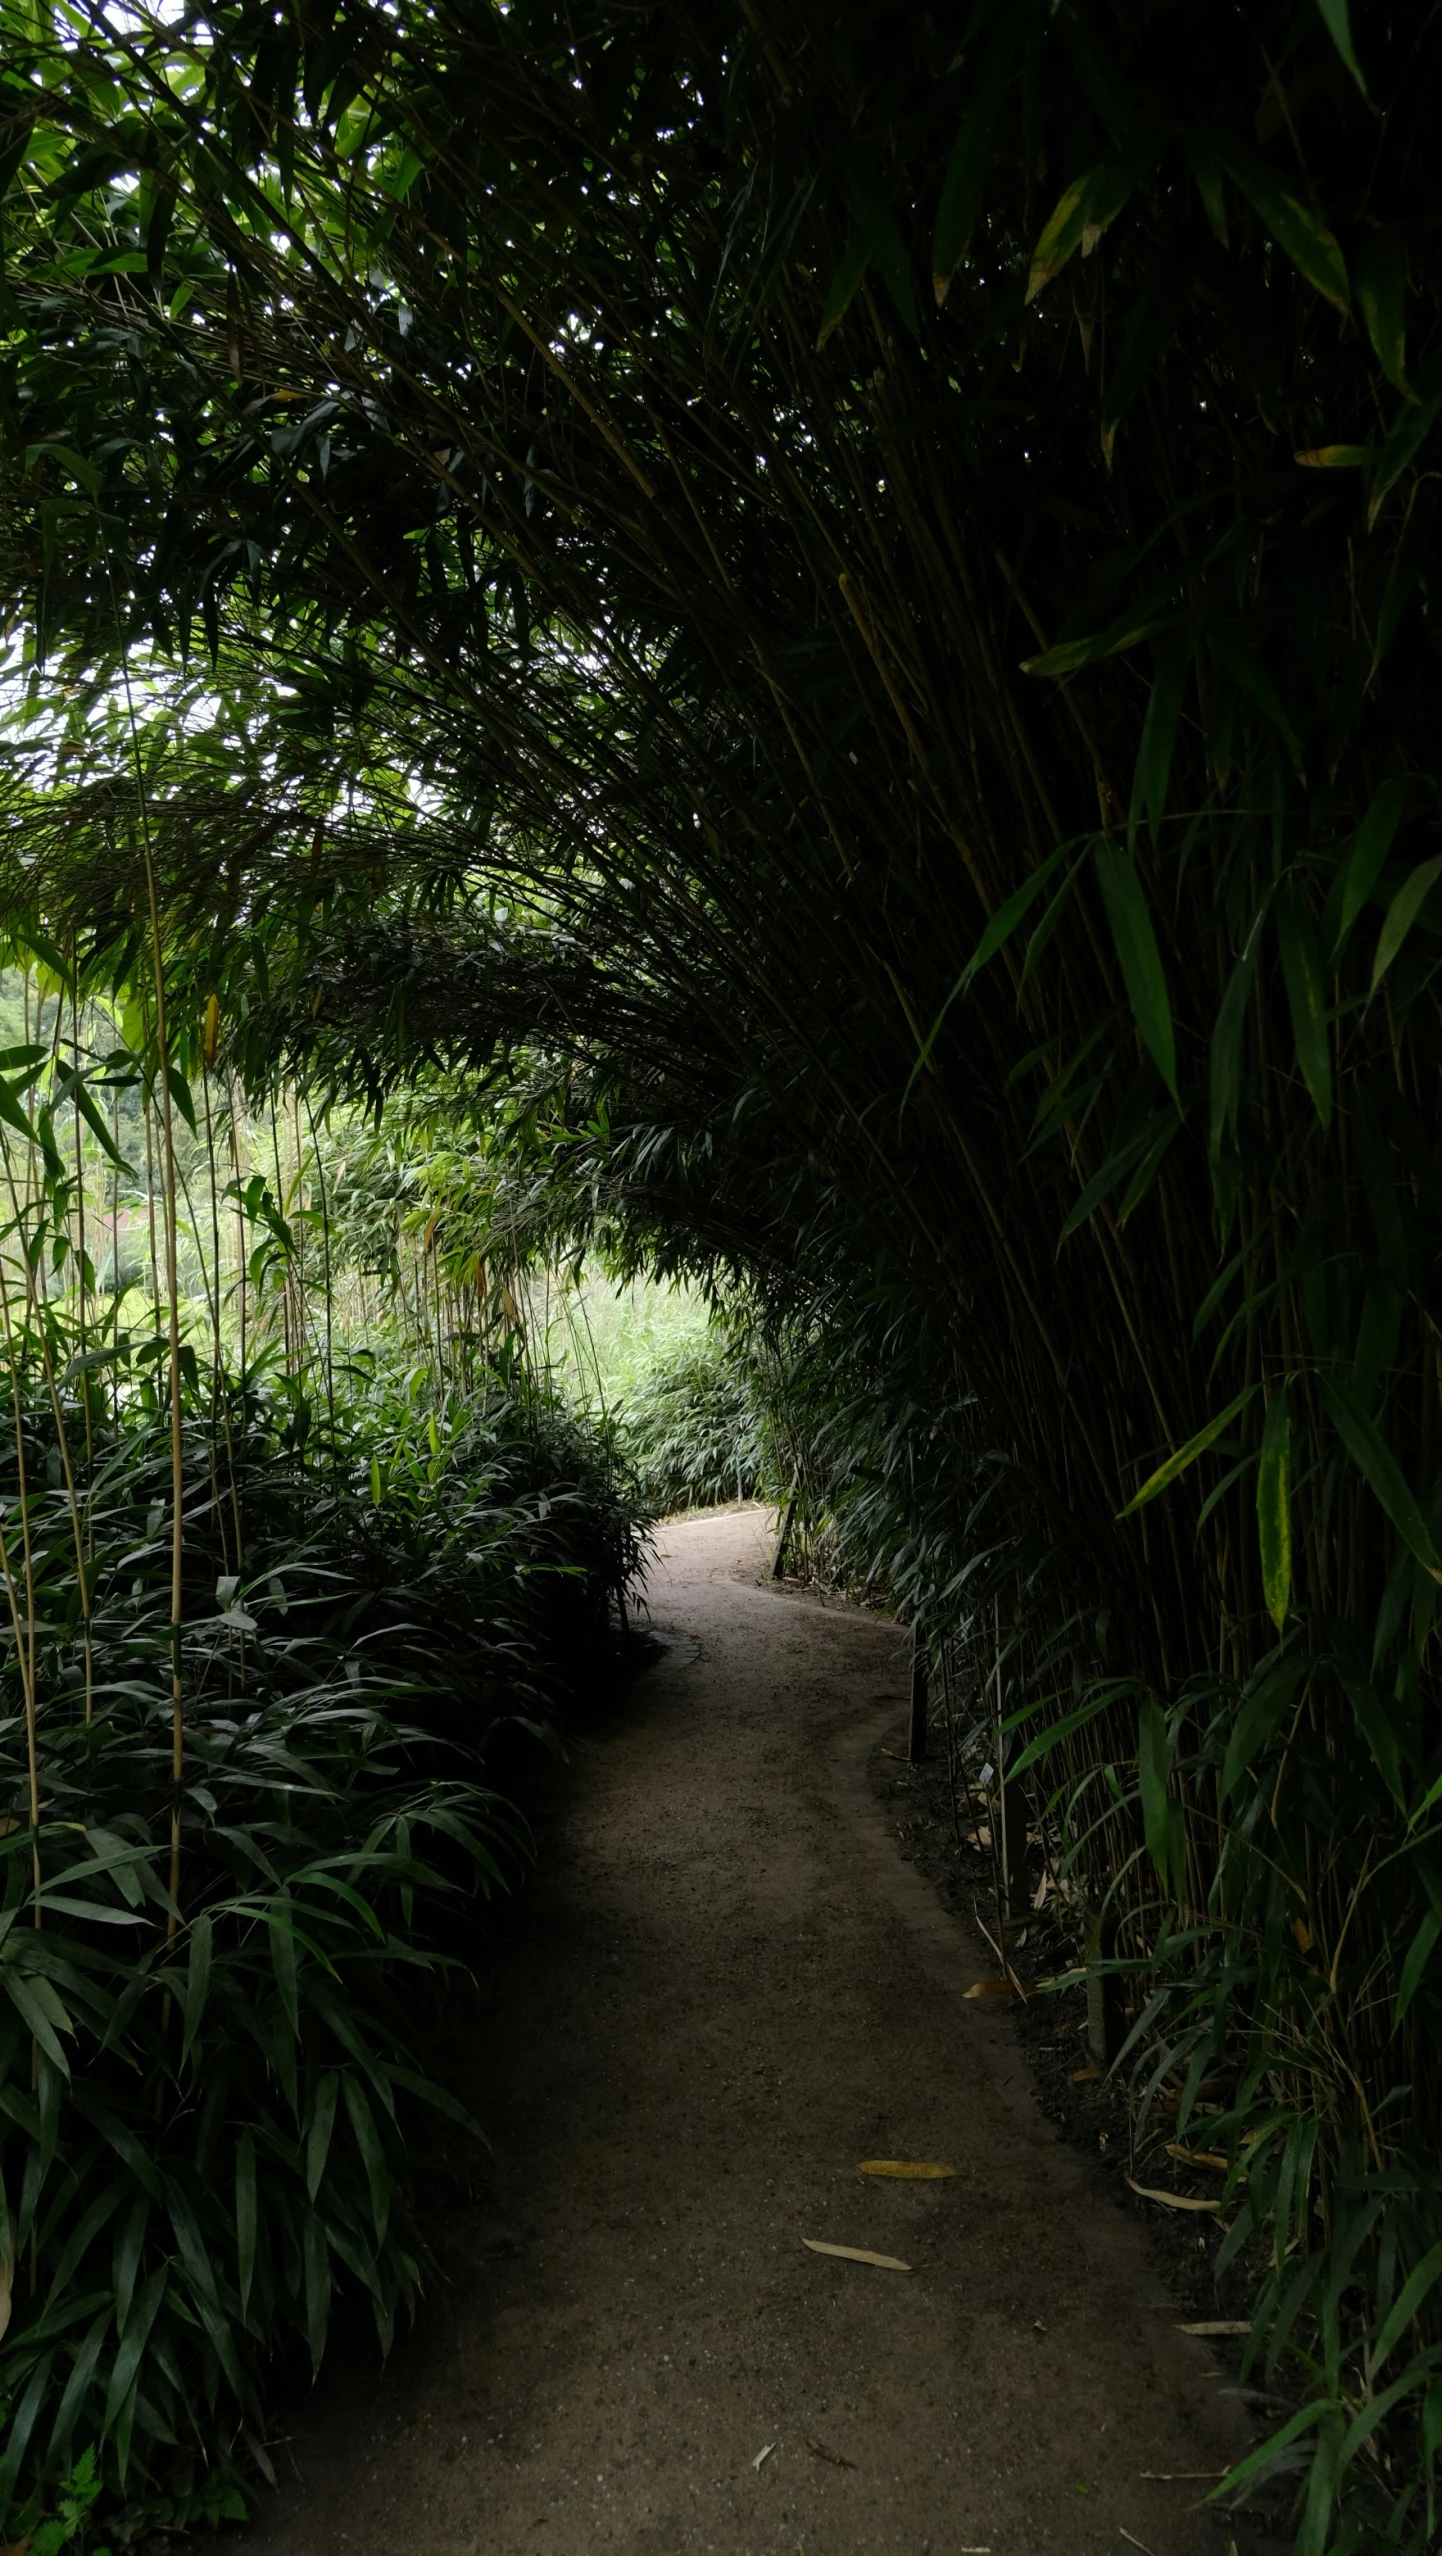 view looking down a path lined with large bamboo trees